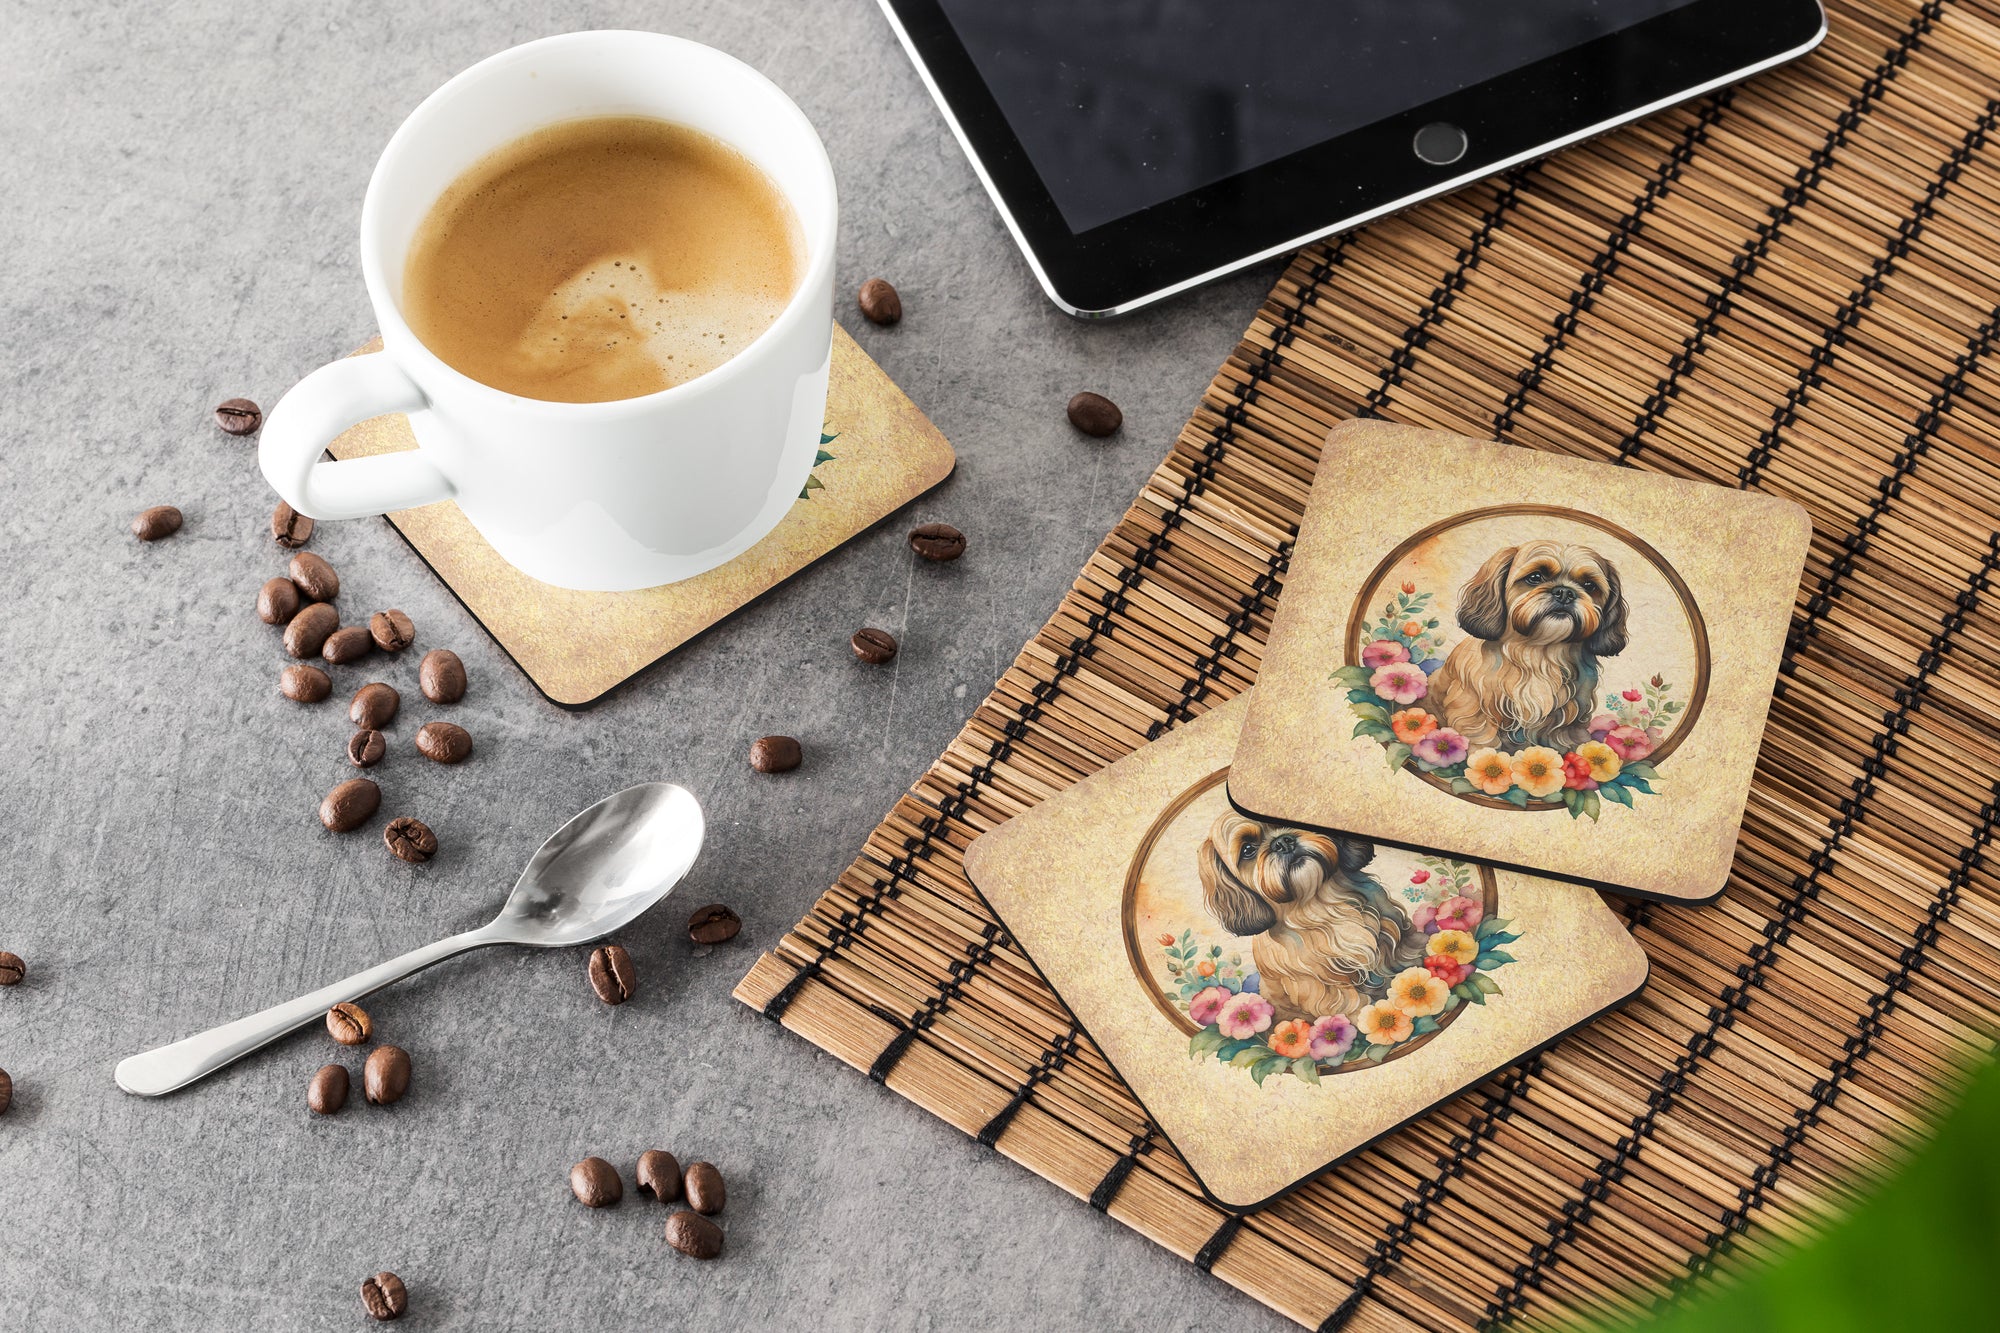 Lhasa Apso and Flowers Foam Coasters